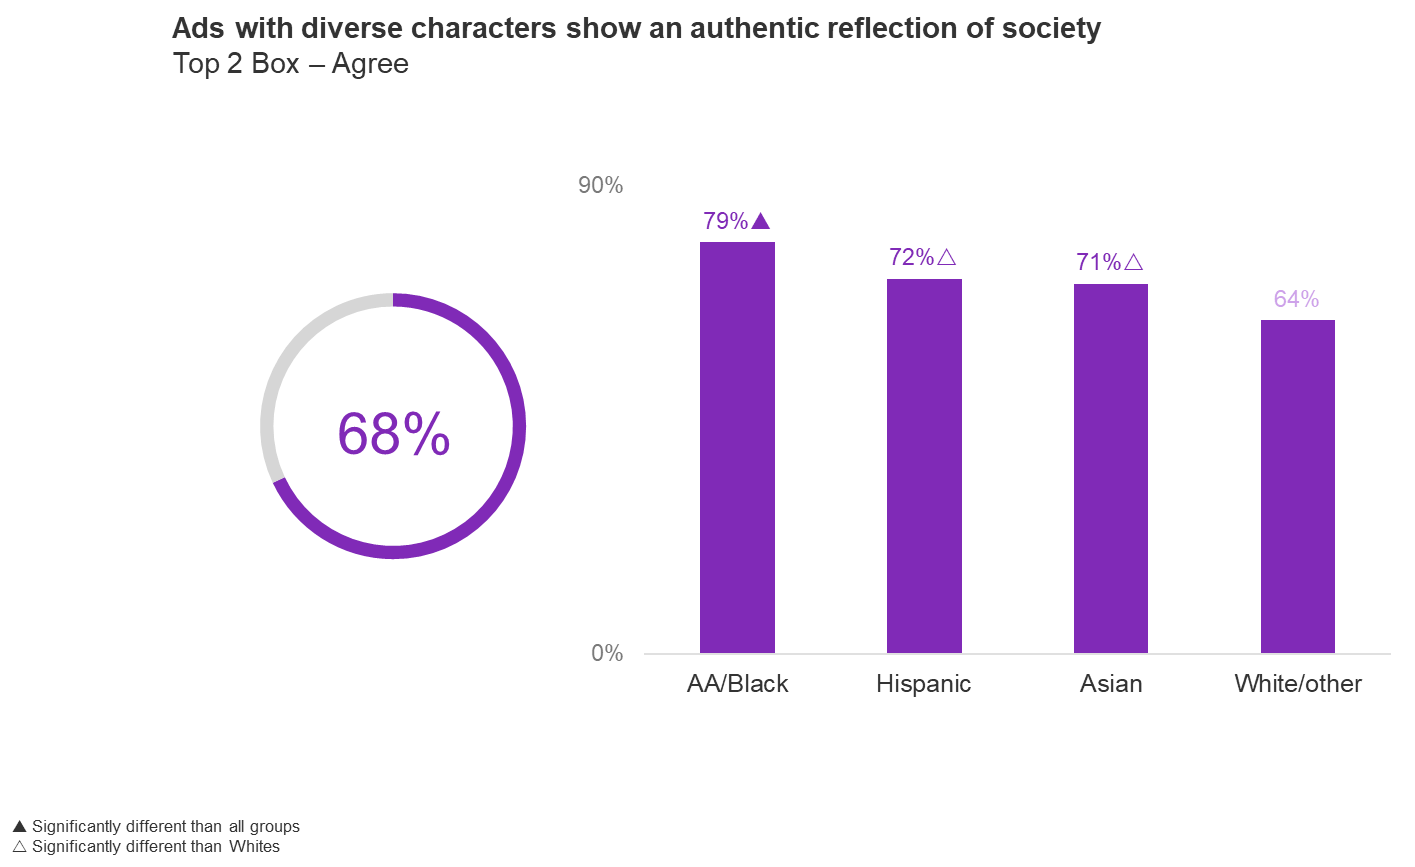 Chart showing that people of color more strongly agree that ads with diverse characters show an authentic reflection of society.